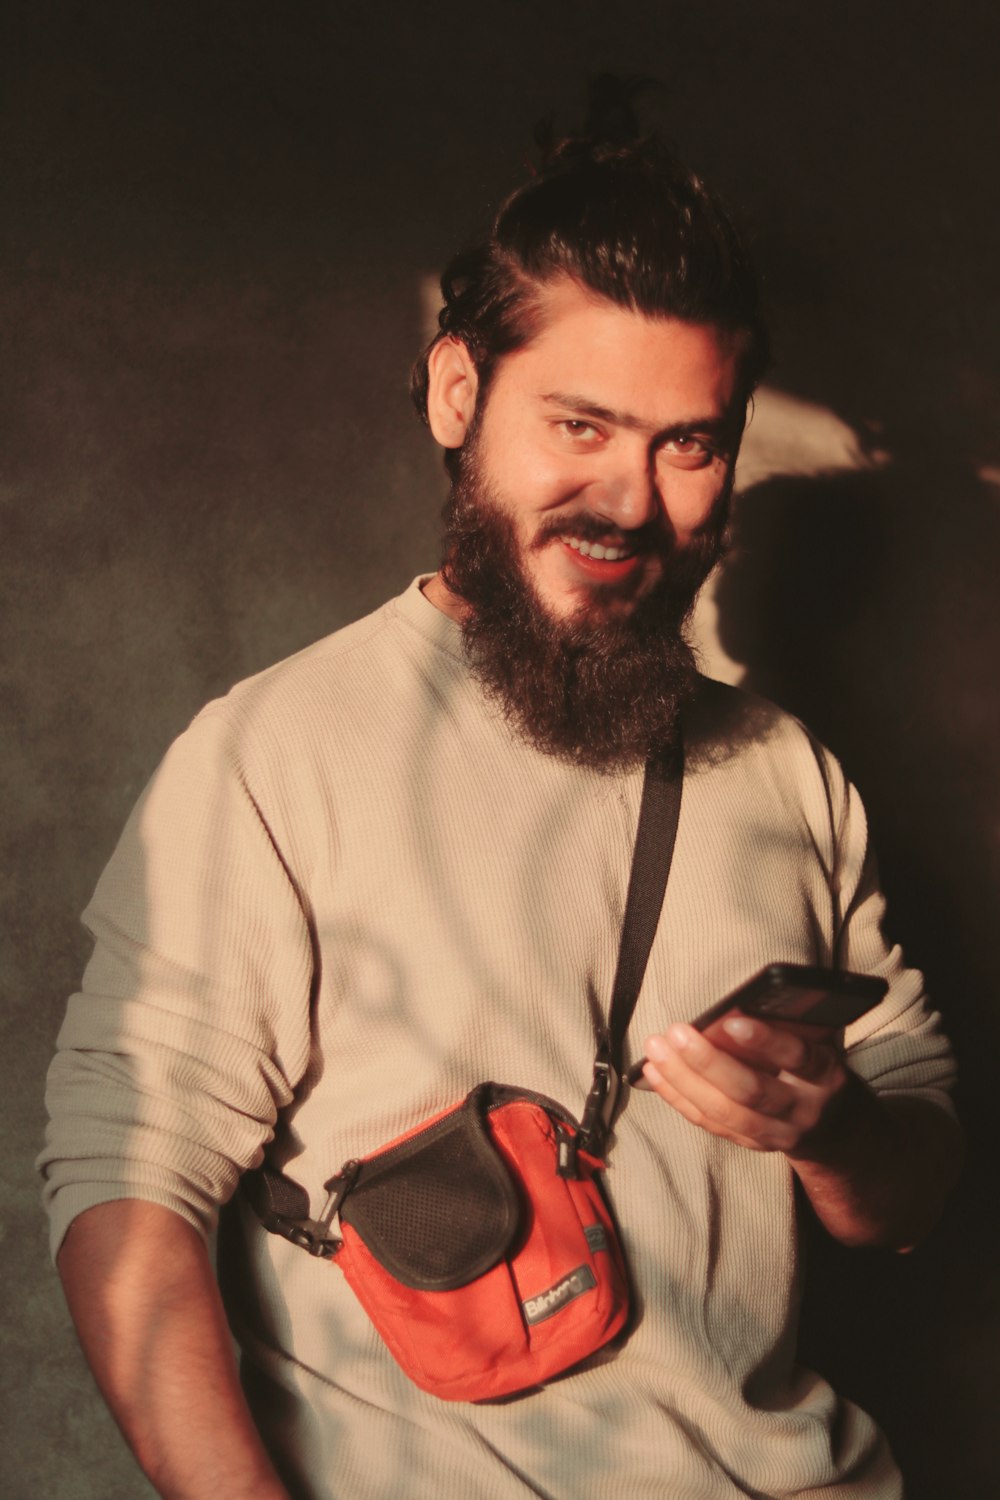 a man with a beard holding a cell phone